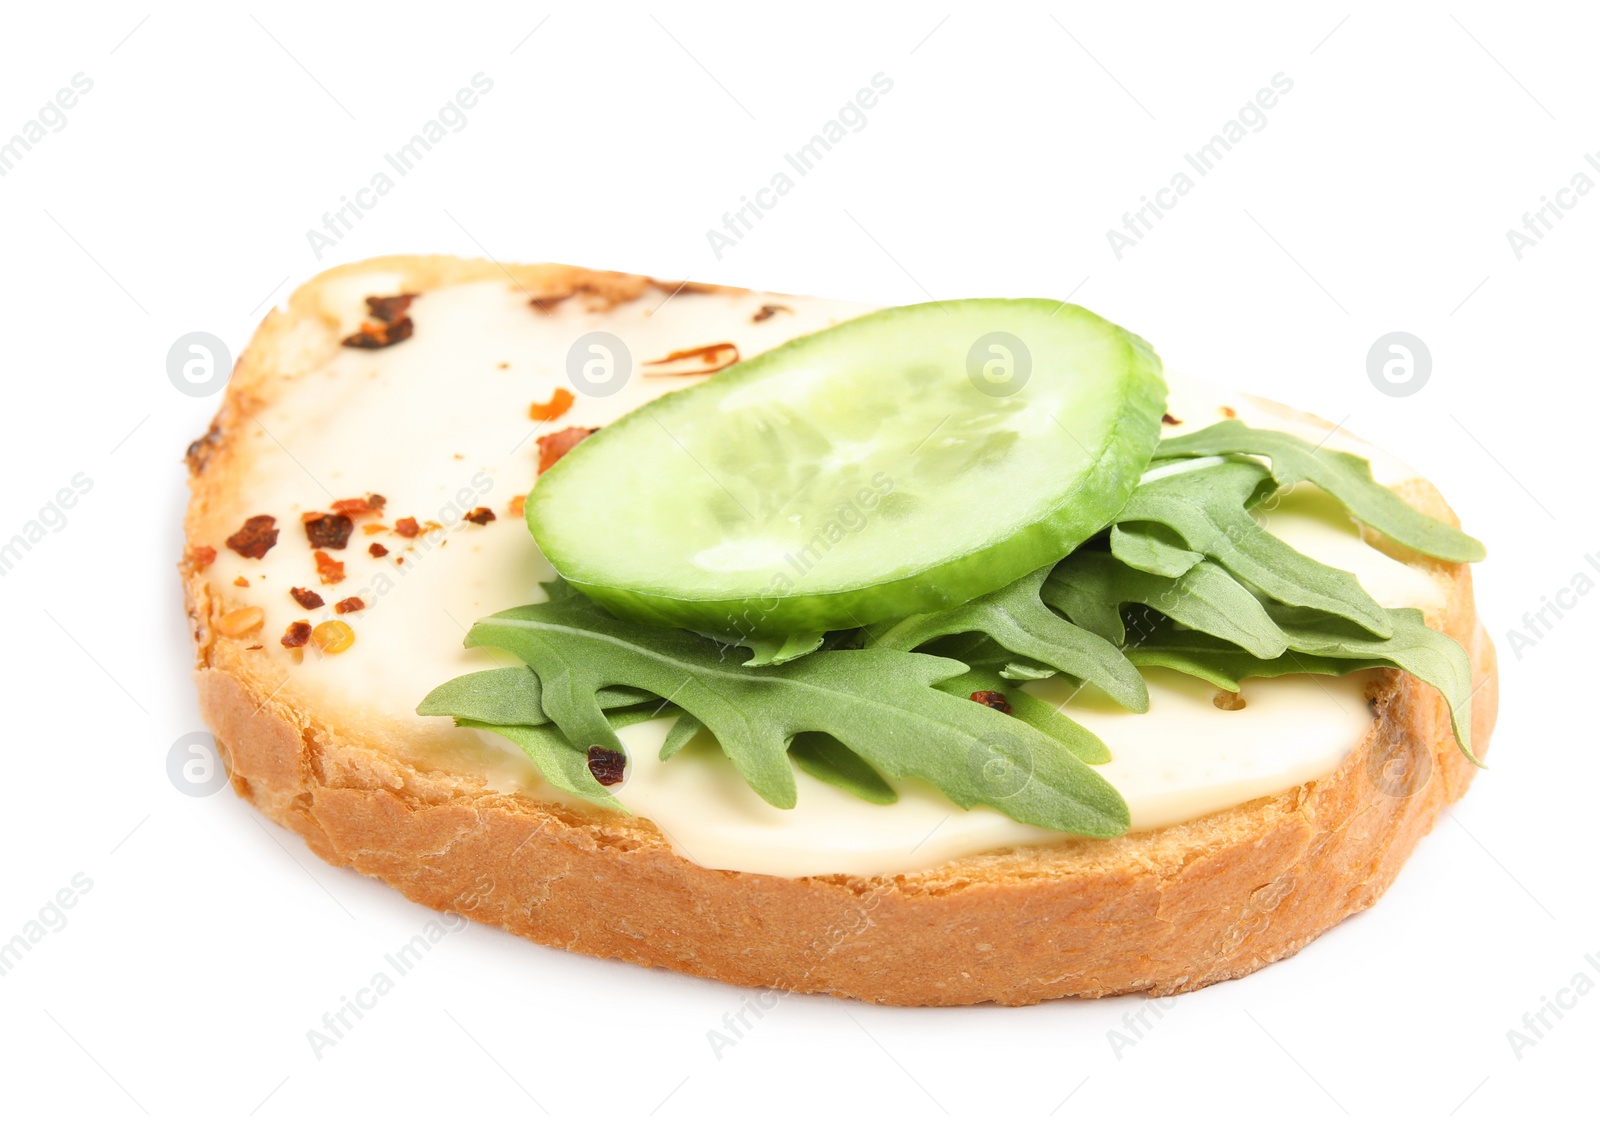 Photo of Slice of bread with spread, cucumber and arugula on white background